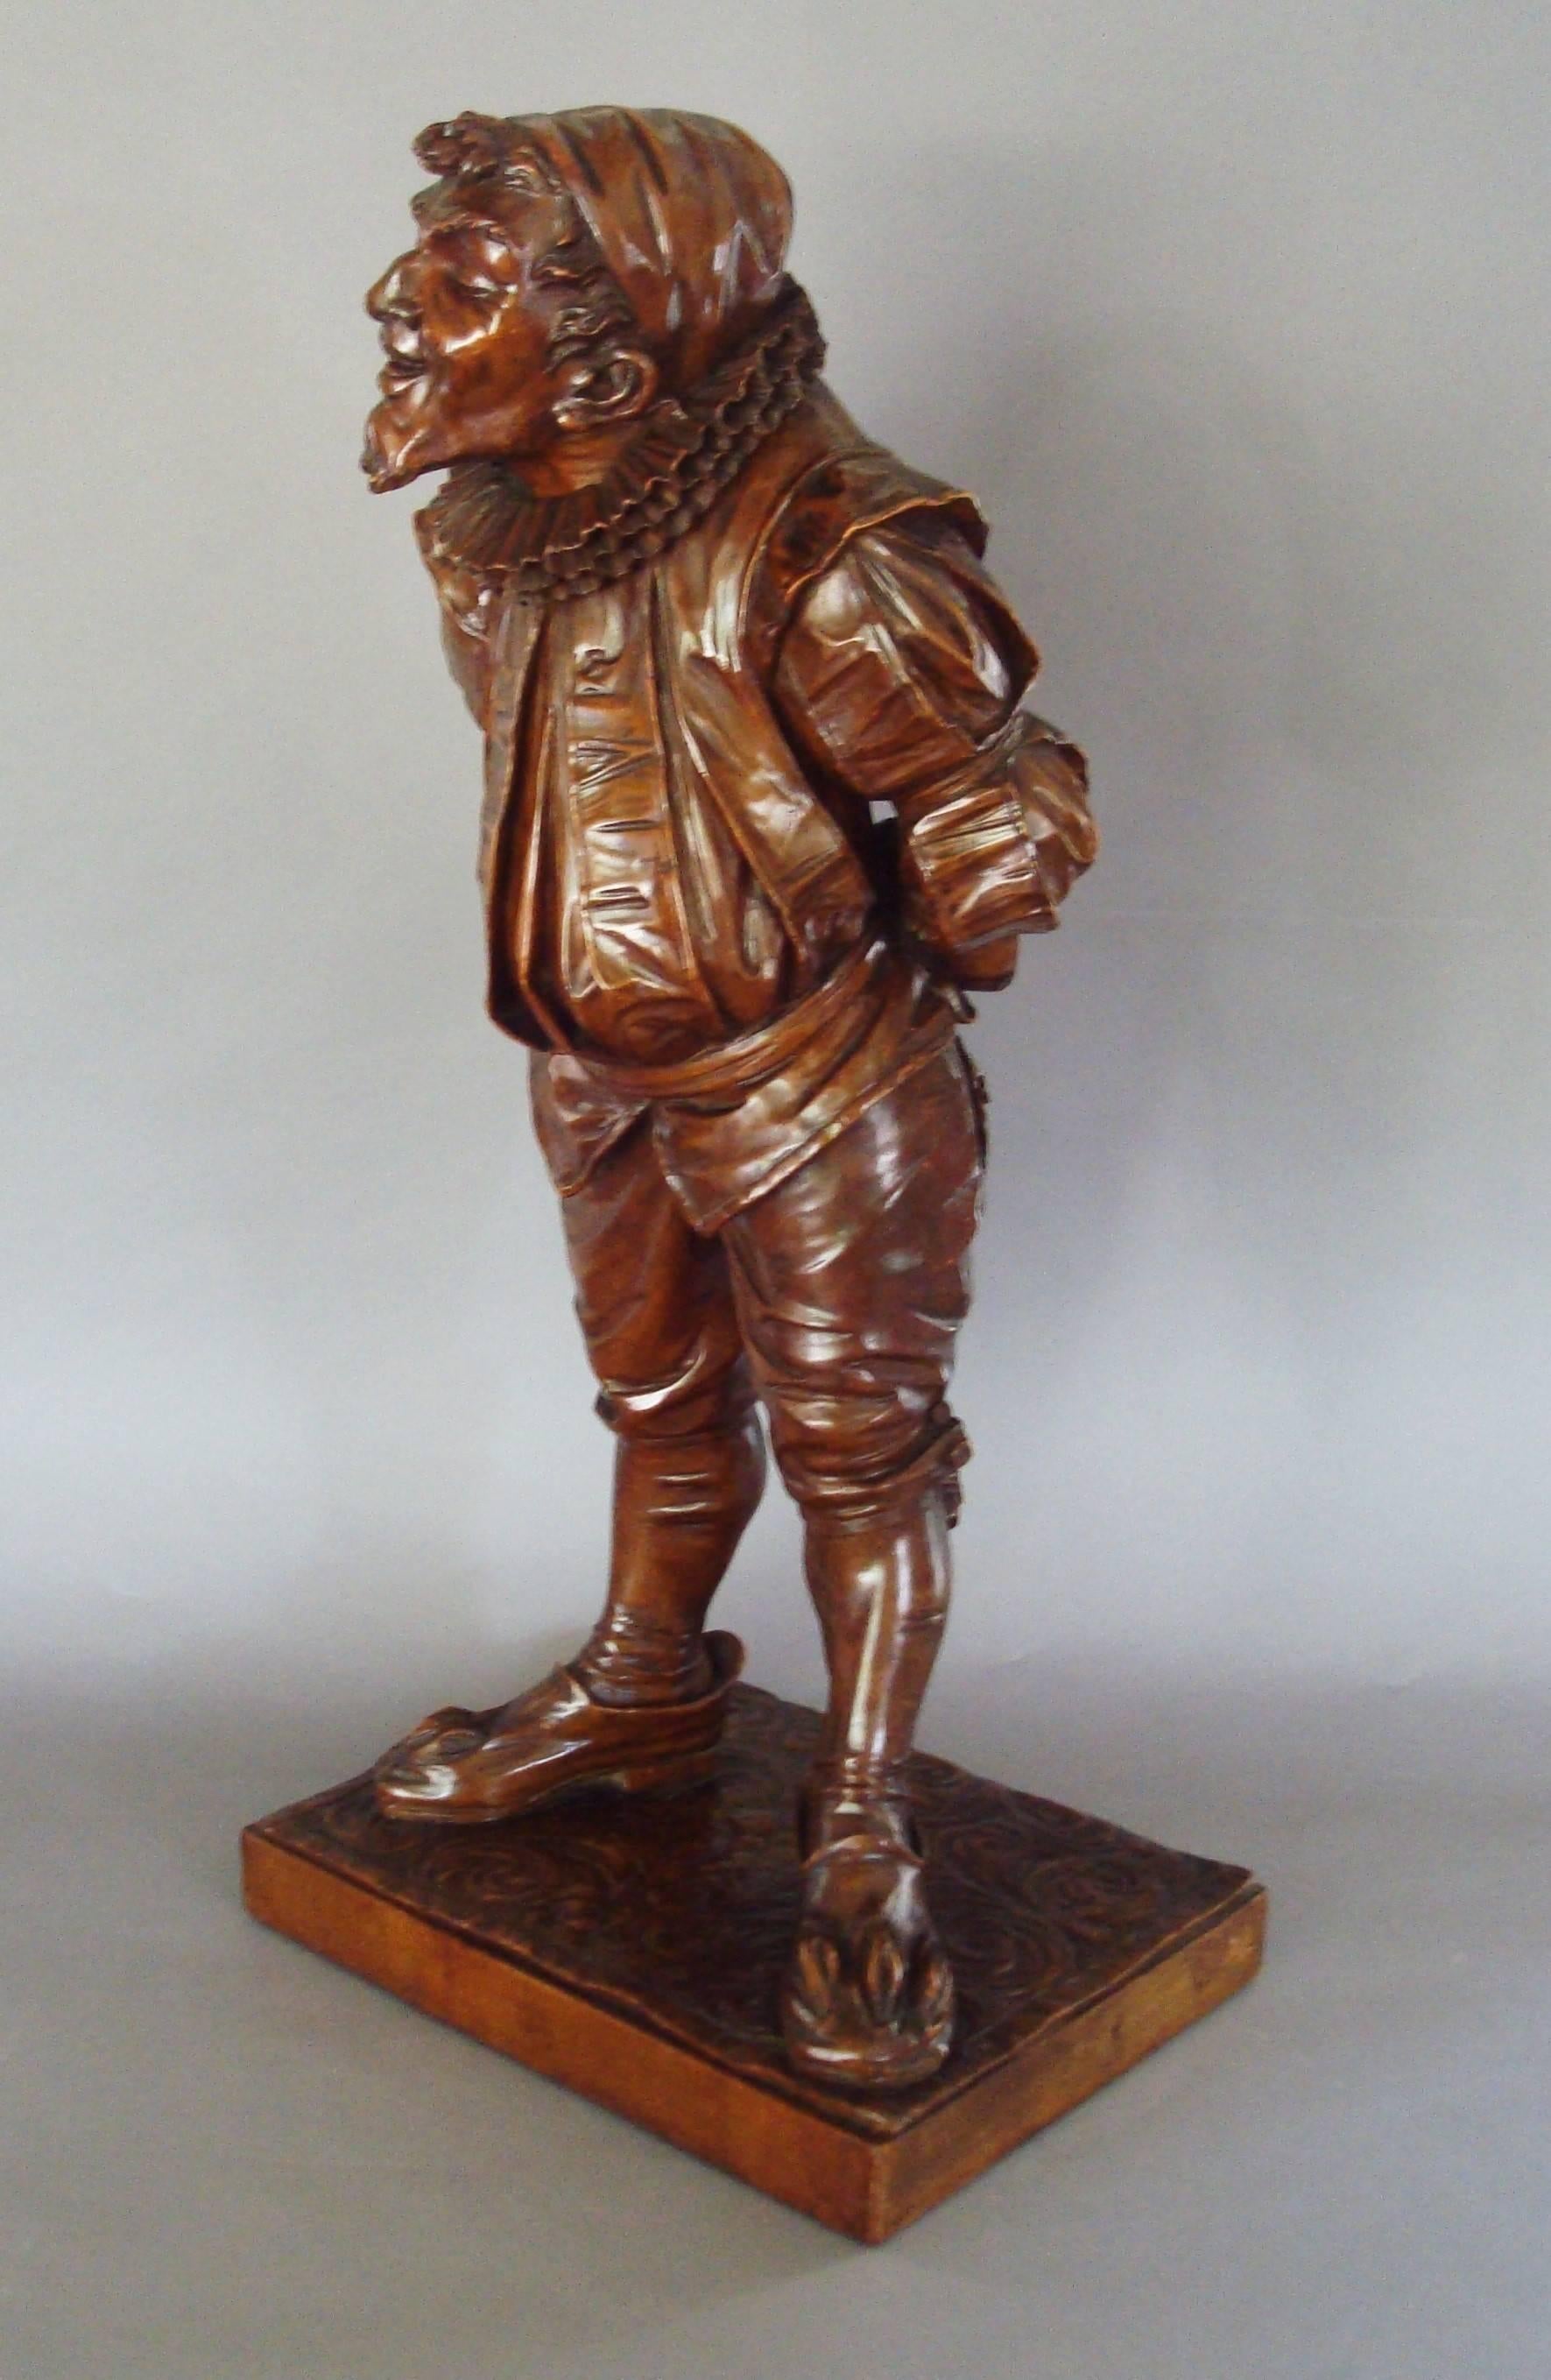 Hand-Carved 19th Century Italian Carved Walnut 'Gobbo' Sculpture